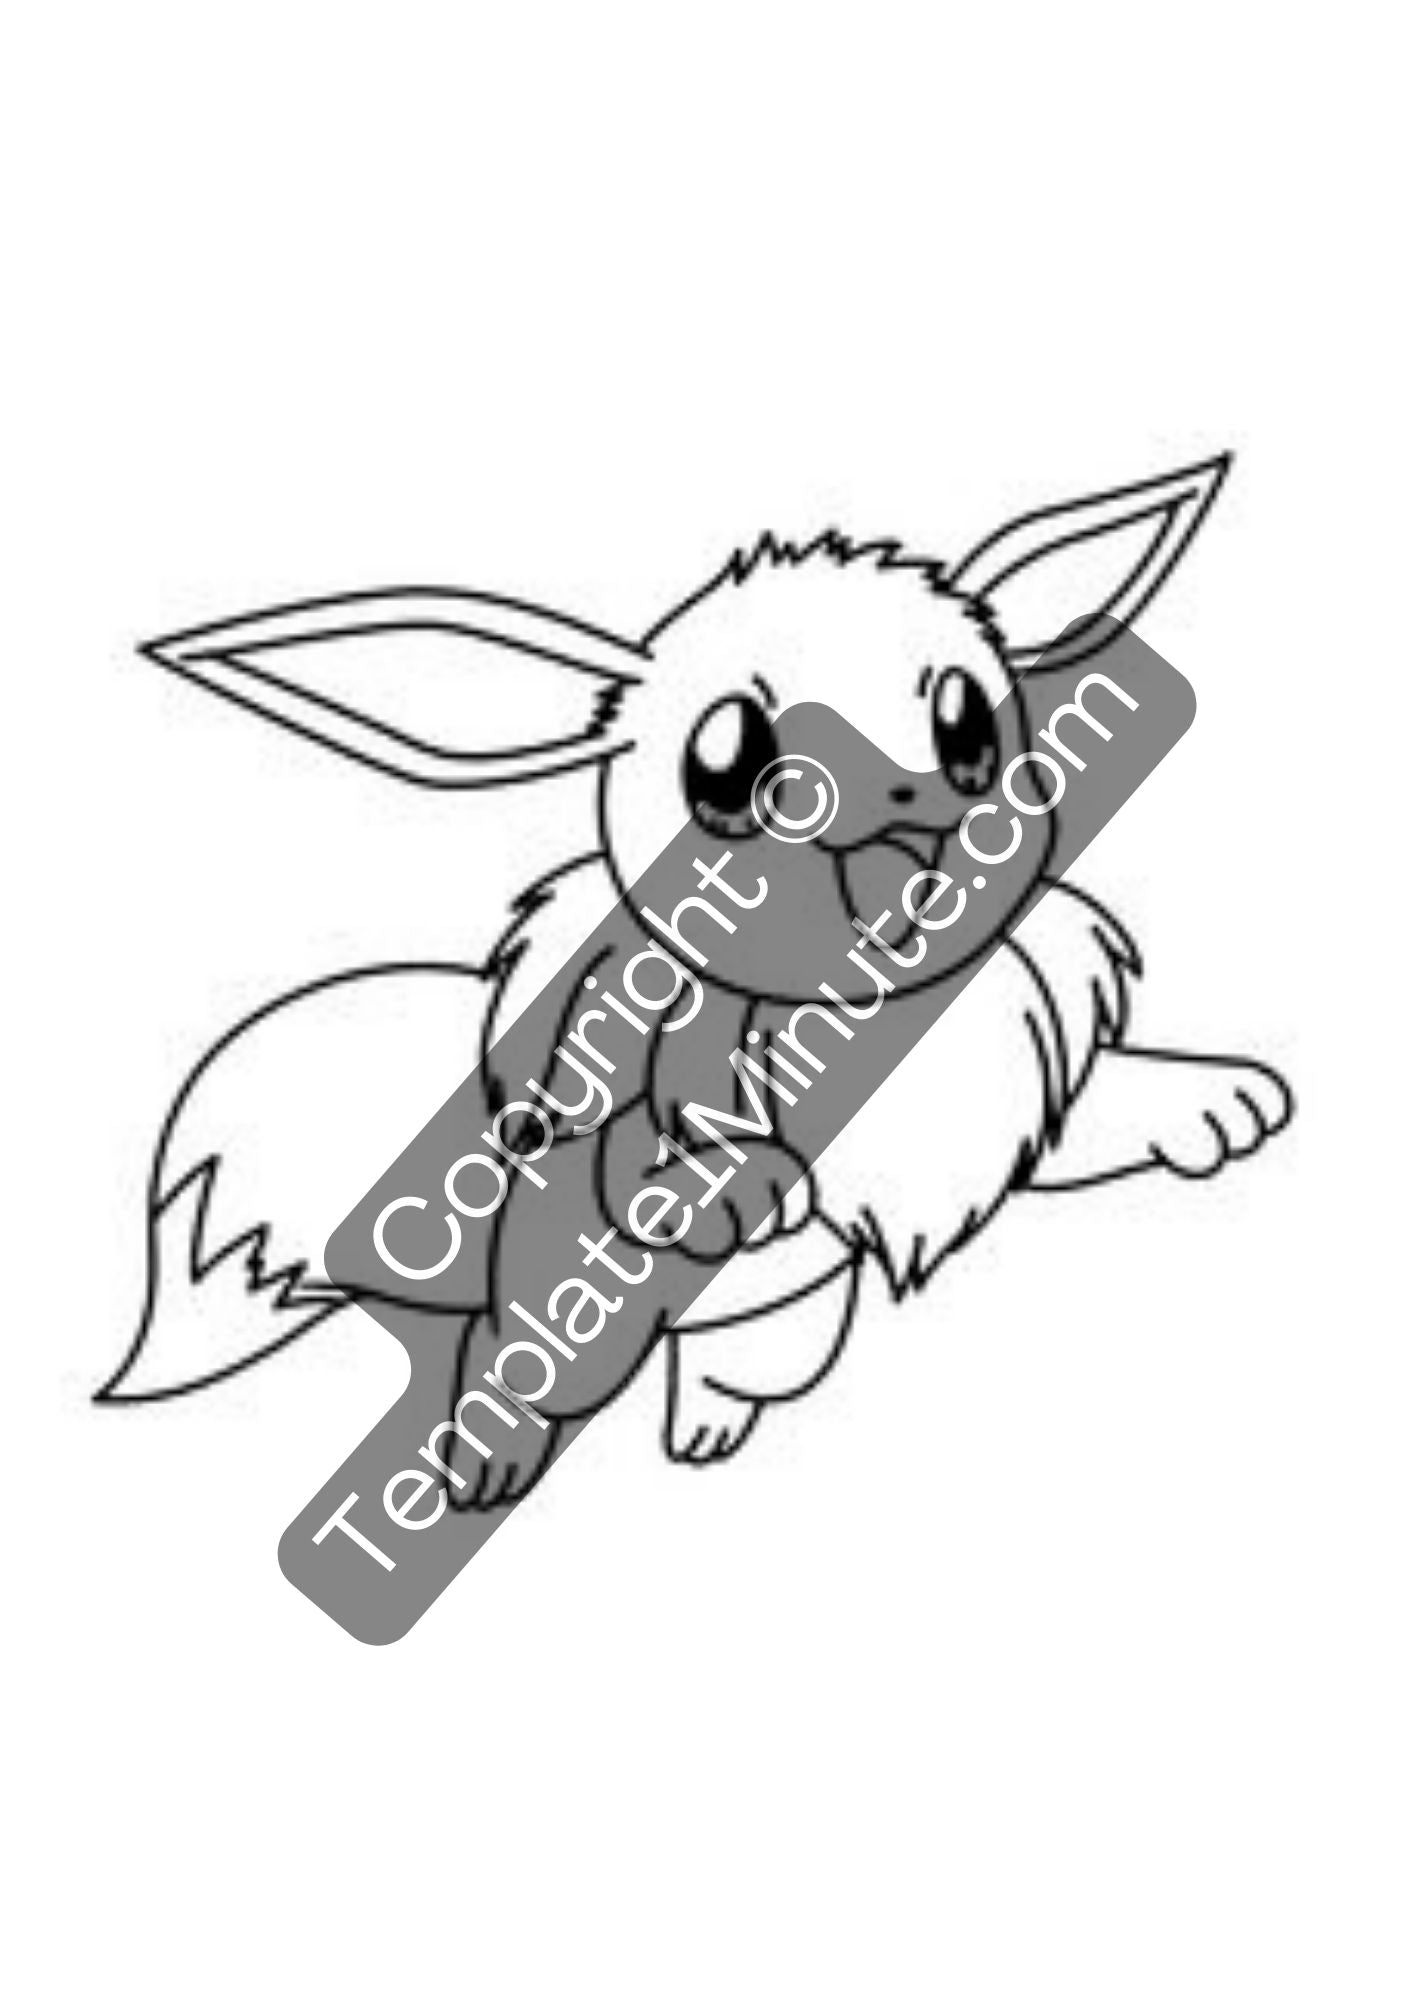 Eevee pokemon coloring pages printable template in pdf â